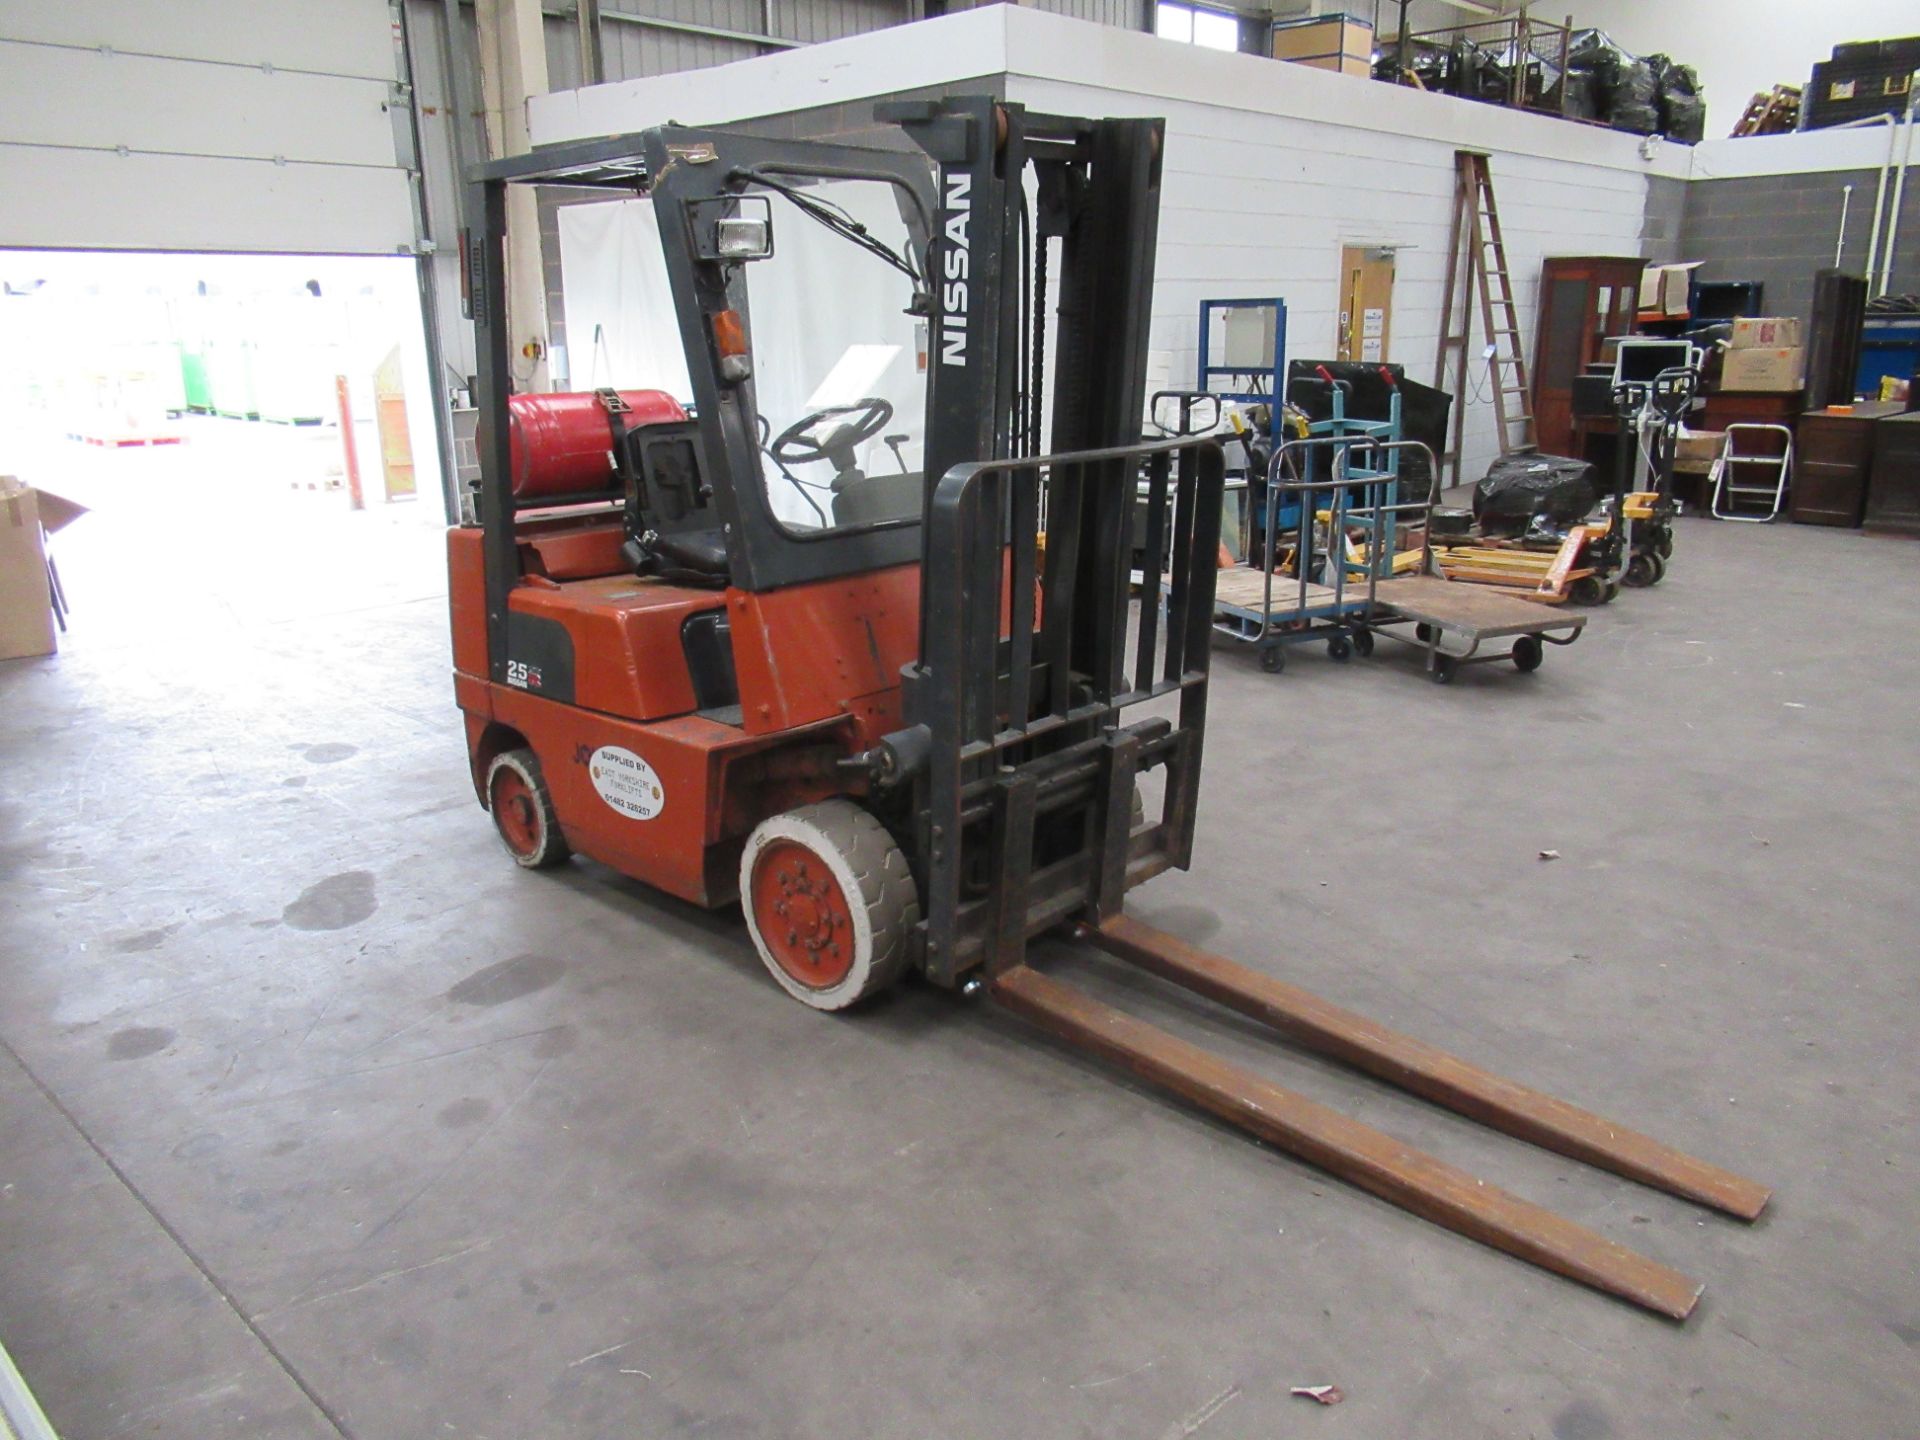 Nissan 25 Gas Powered Forklift Truck with Sideshift Attachment, Max Capacity 2500kg. Drives and Oper - Image 3 of 9